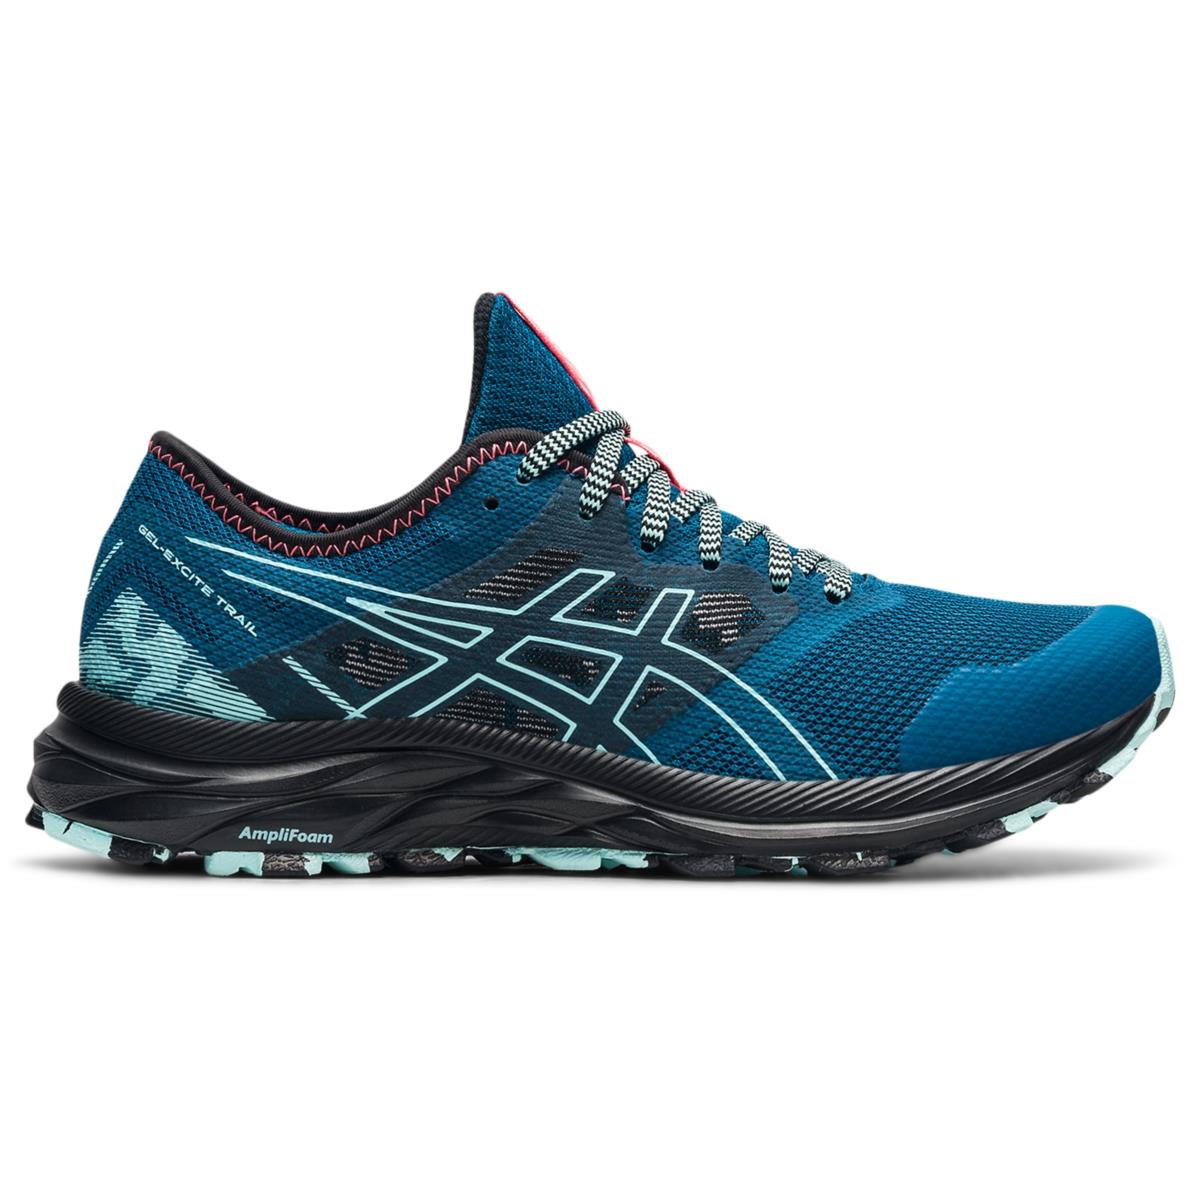 Asics Women`s Gel-excite Trail Running Shoes 1012B051 DEEP SEA TEAL/CLEAR BLUE